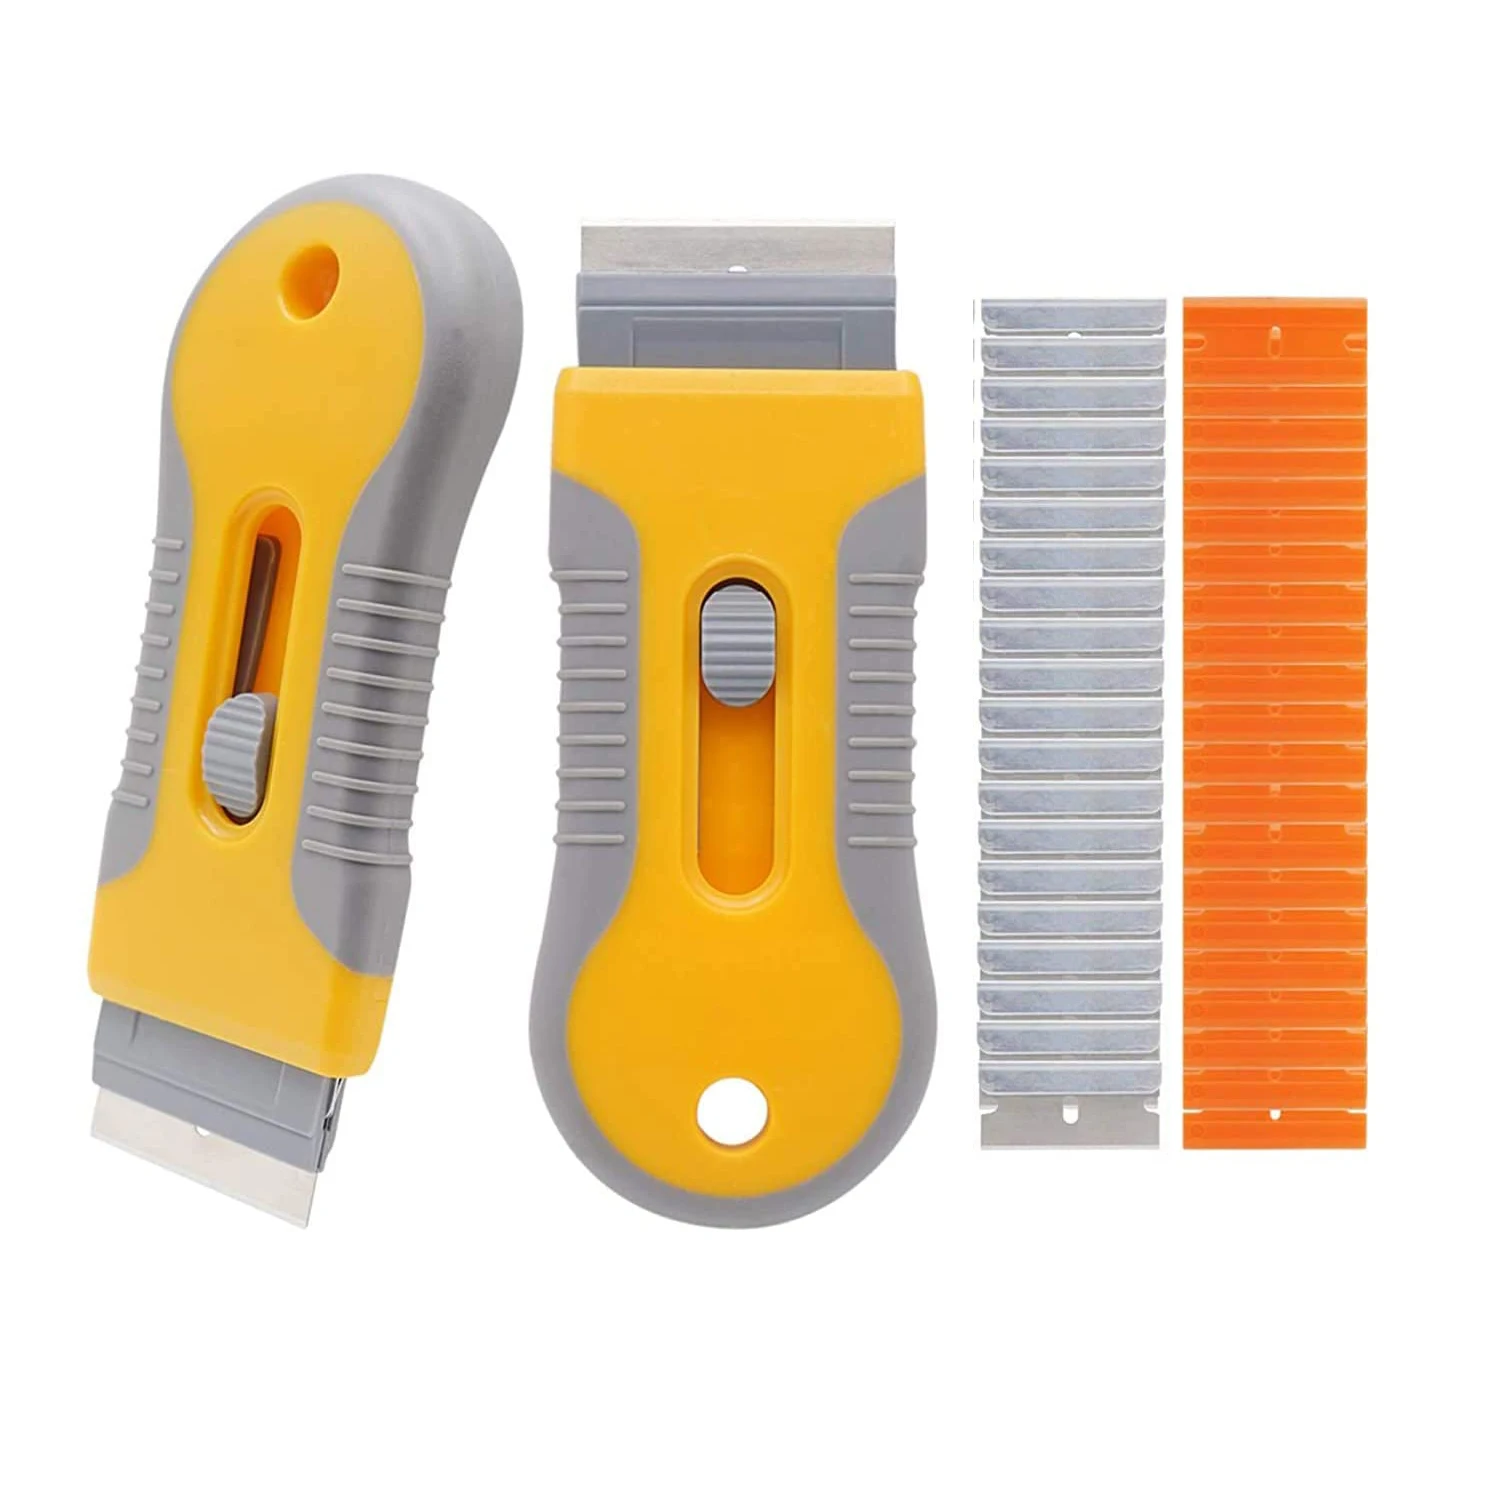 2 Razor Scrapers + 40 Blades Scraping Tool Car Window Glass Sticker Viny Film Tool Label Glue Paint Removal Cleaning Squeegee